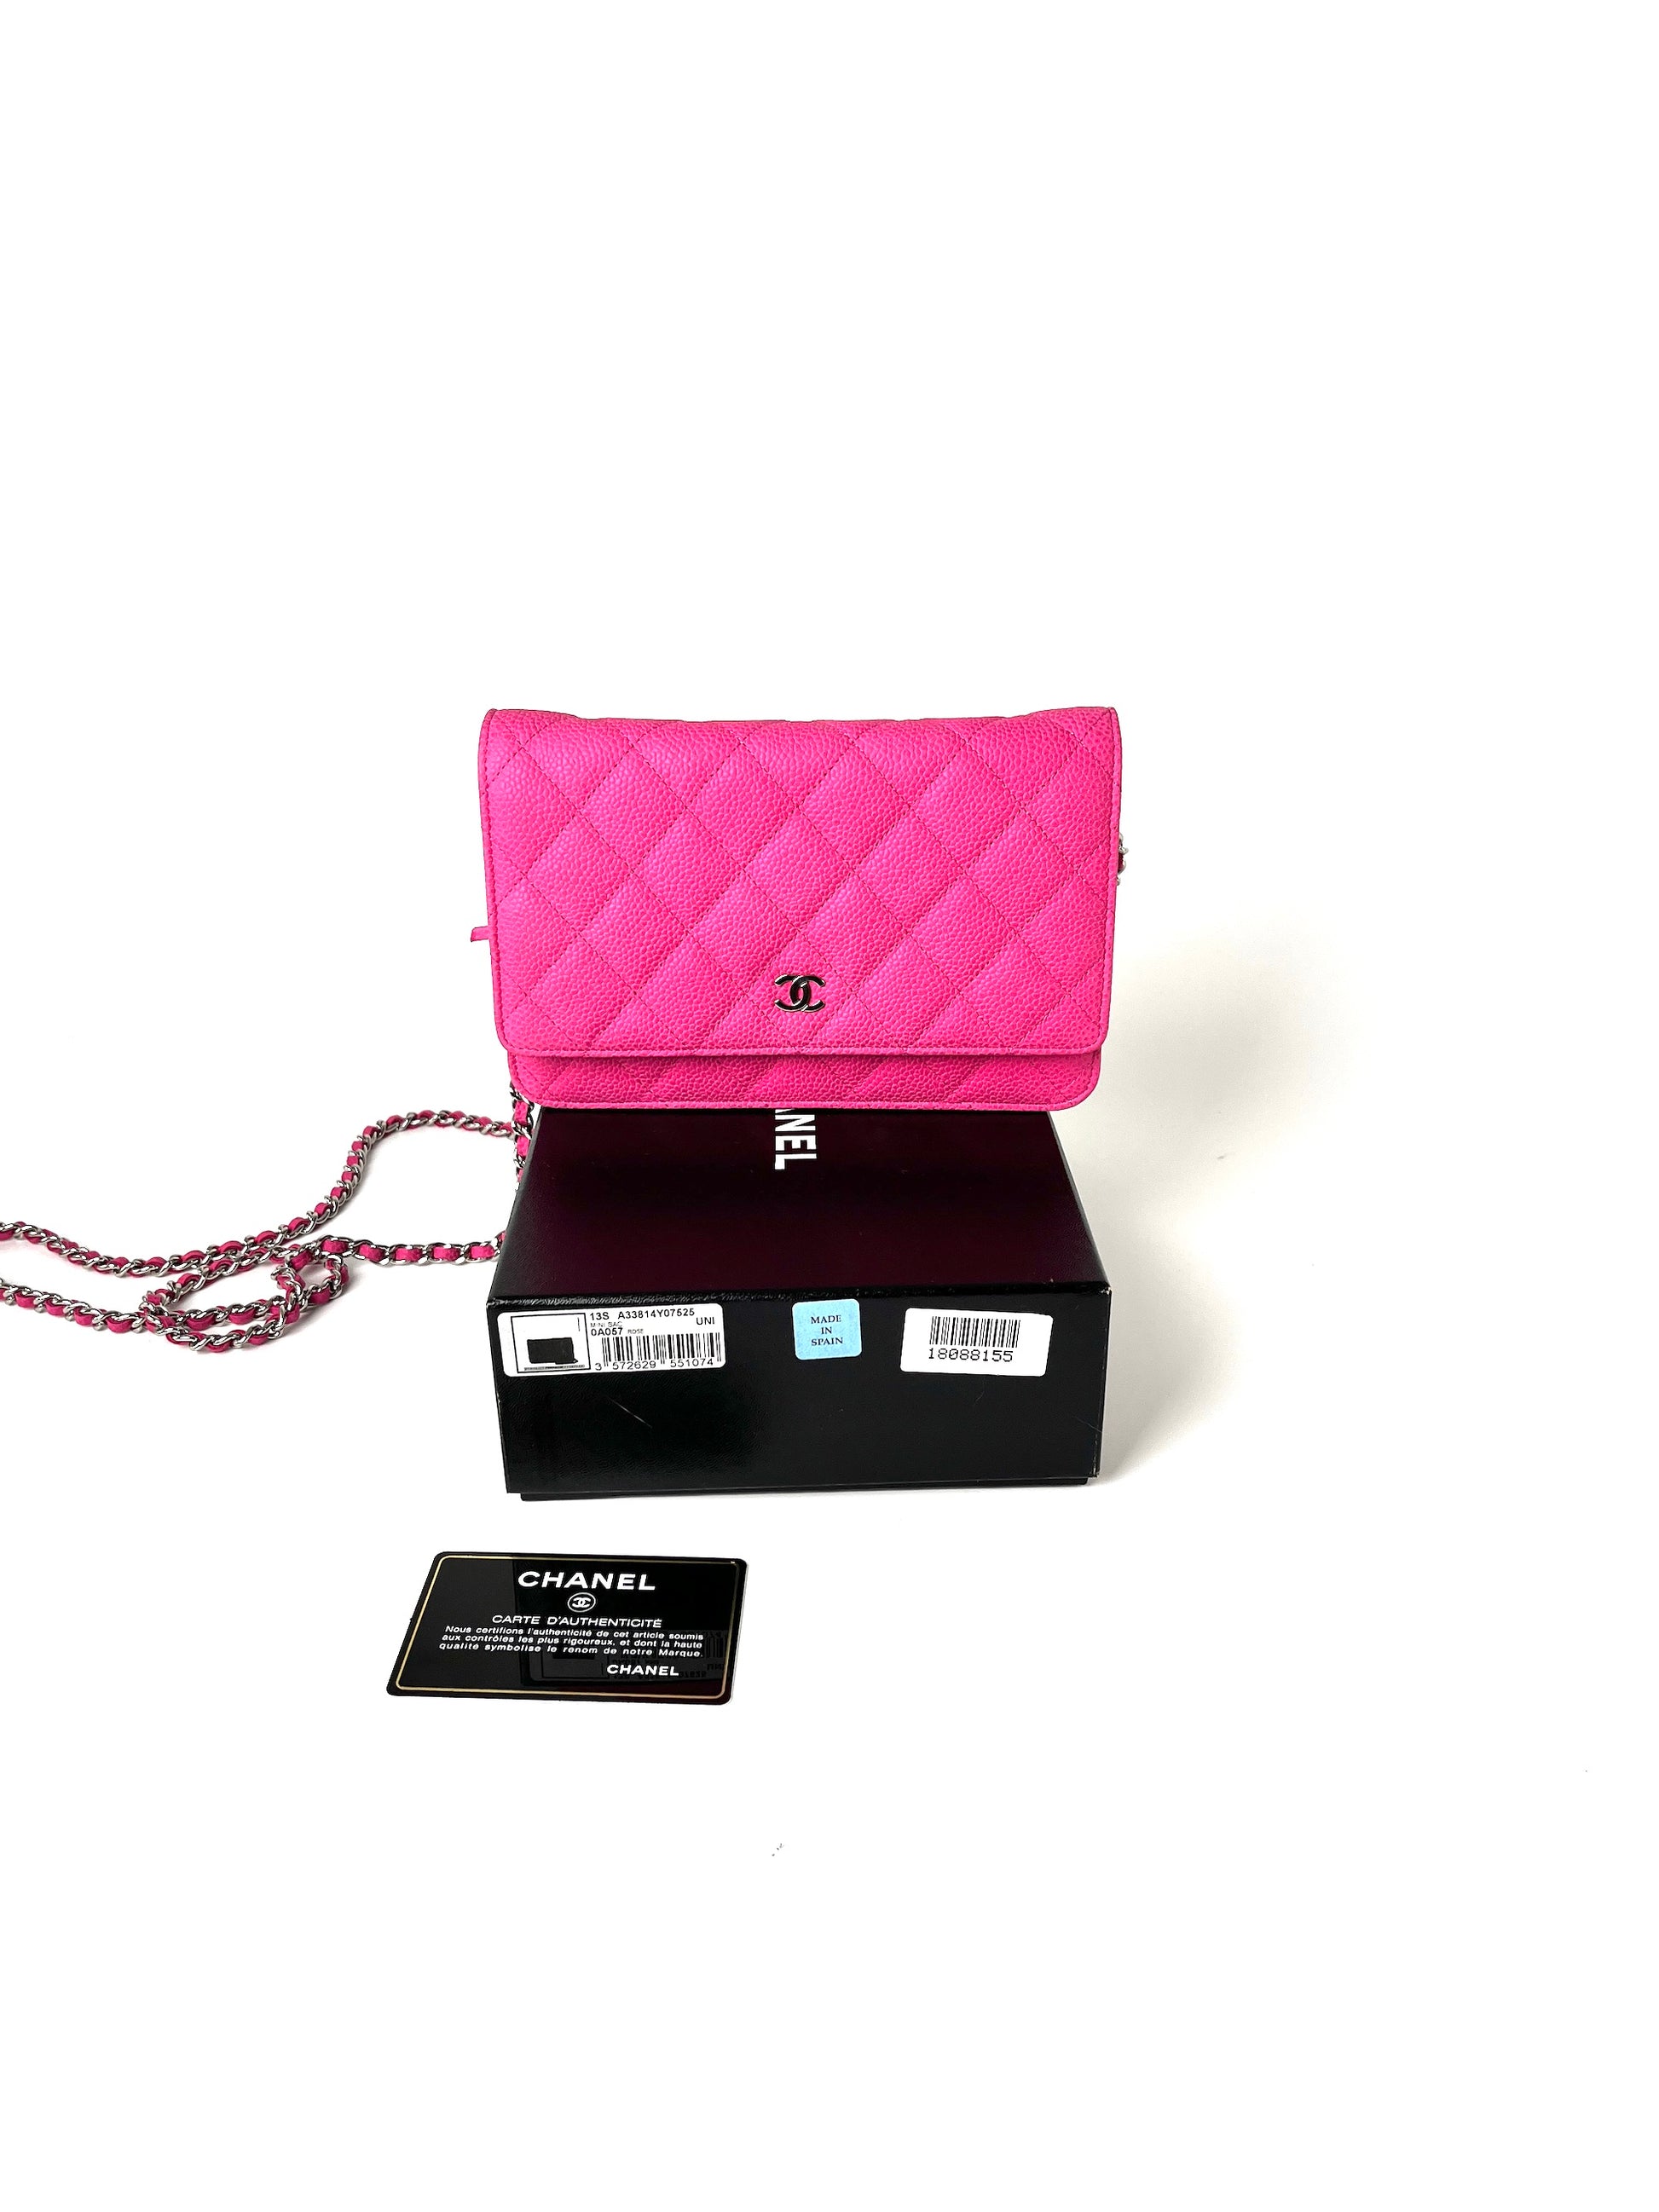 CHANEL 13S WOC Wallet on Chain Hot Pink Quilted Leather Crossbody Bag Barbiecore 